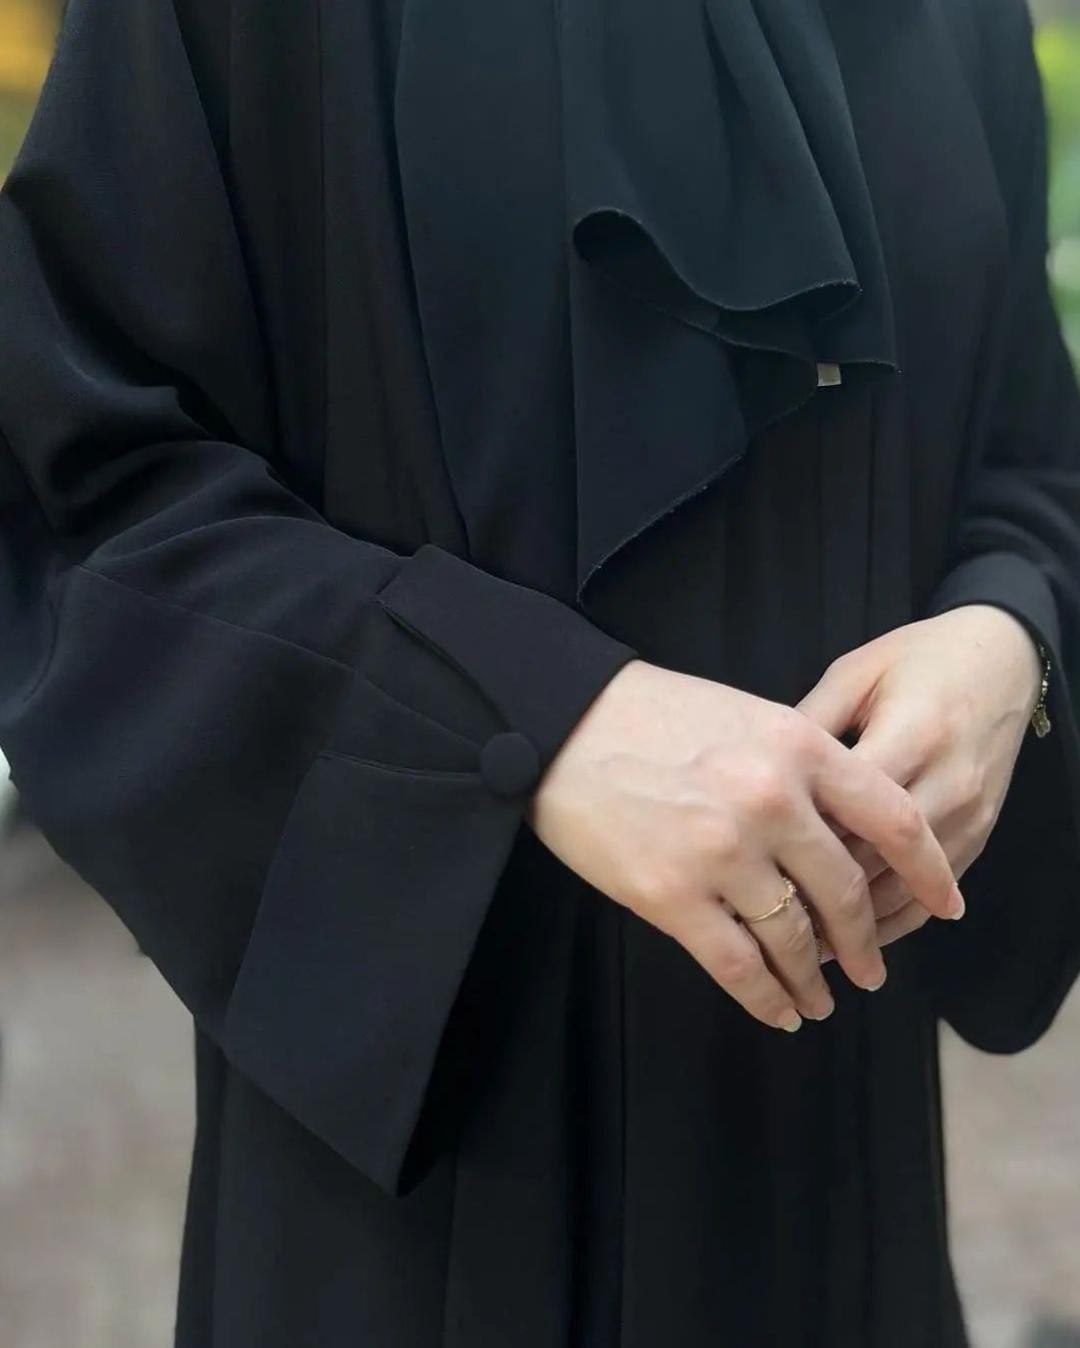 Classic Abaya With Stoller